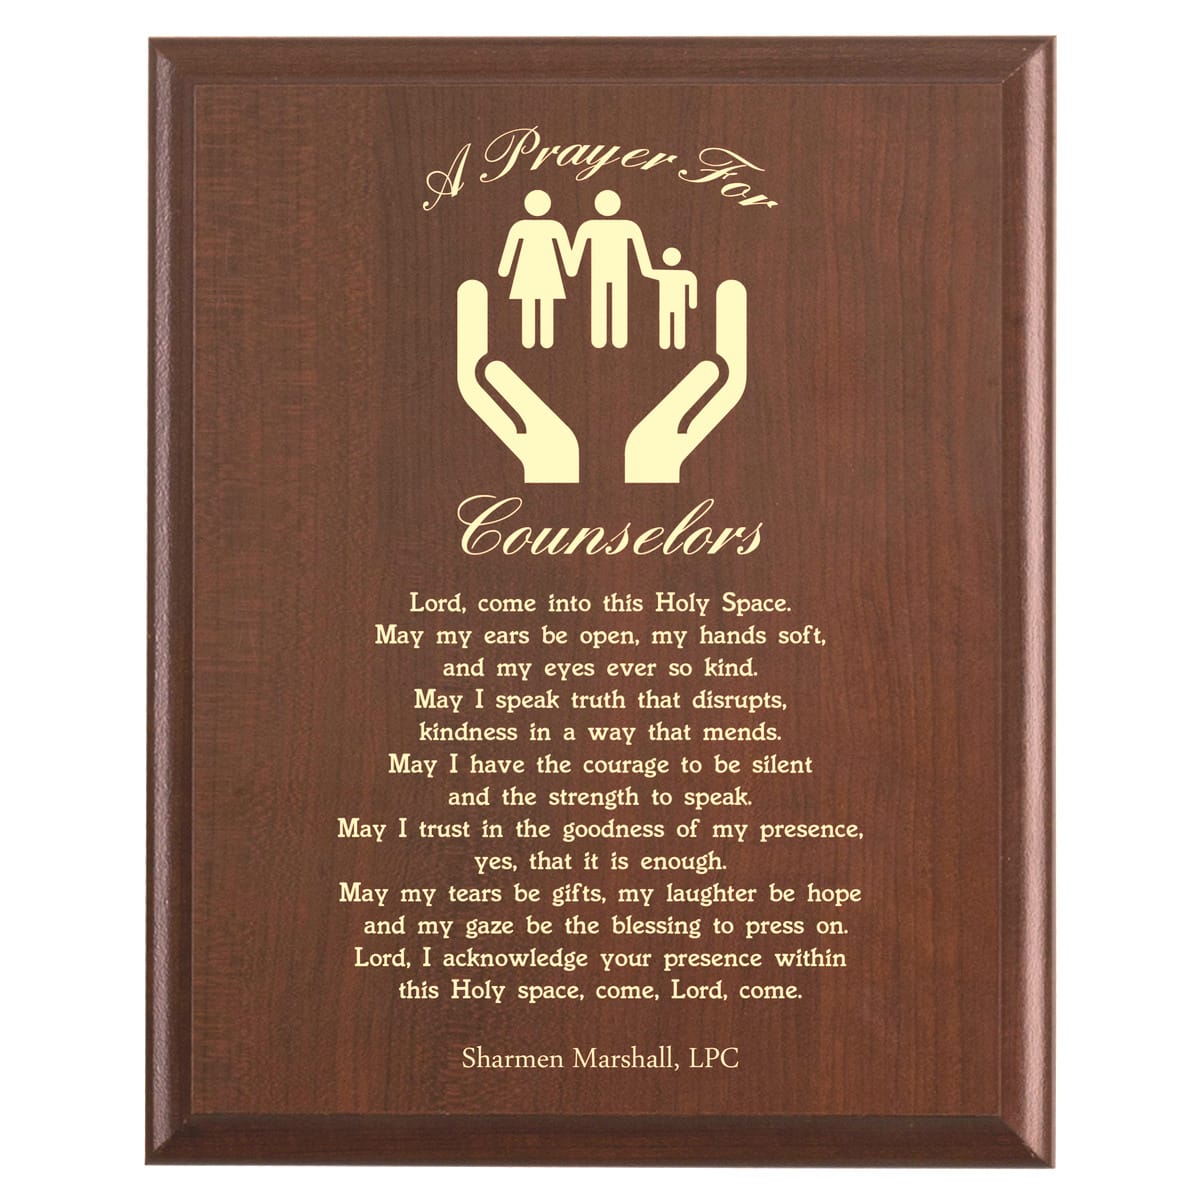 Plaque photo: Counselor Prayer Plaque design with free personalization. Wood style finish with customized text.